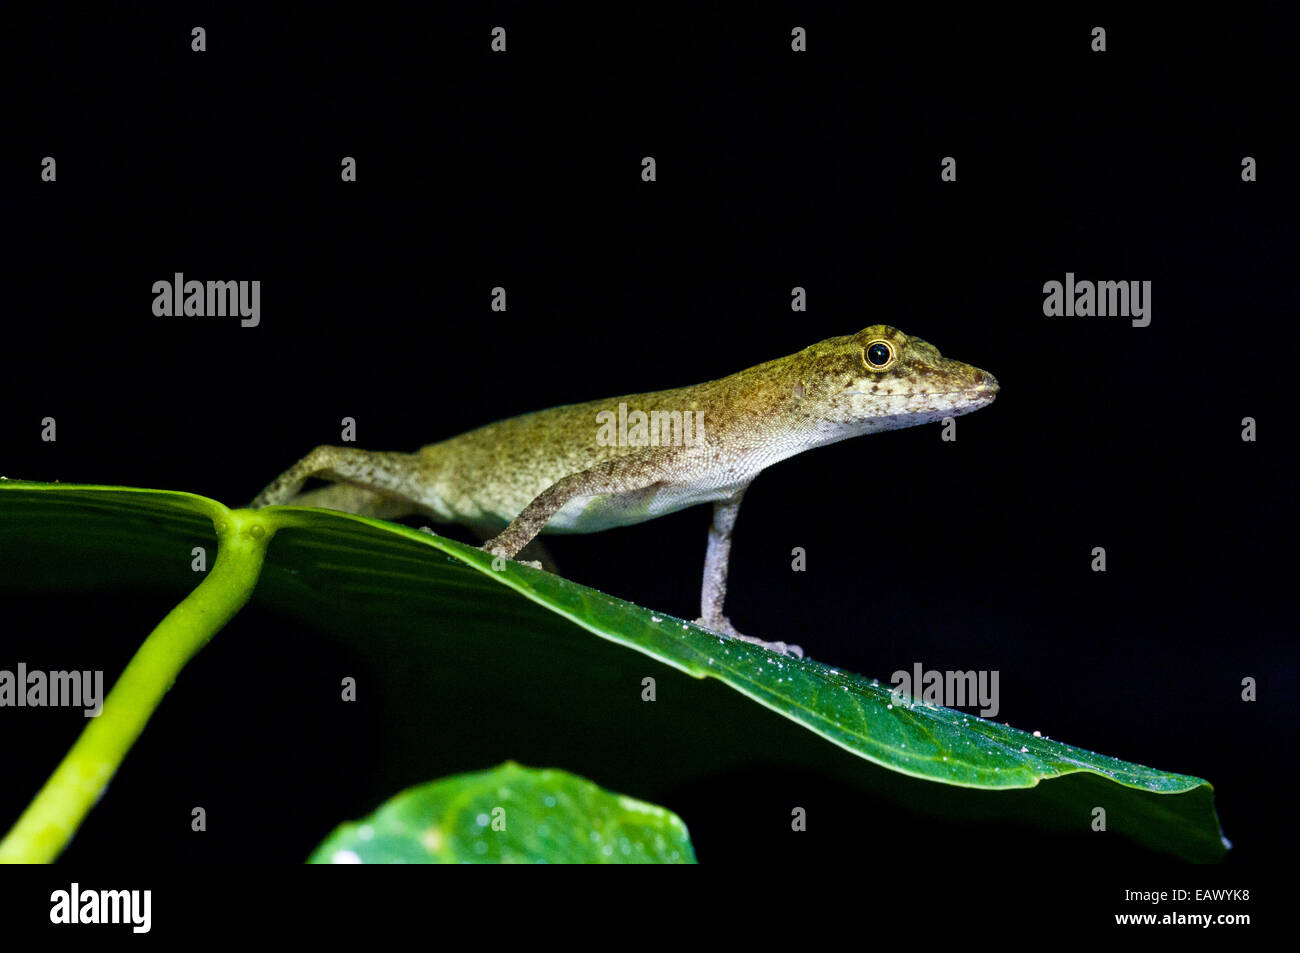 A slender Amazon anole perched upon a leaf in the Amazon rainforest. Stock Photo